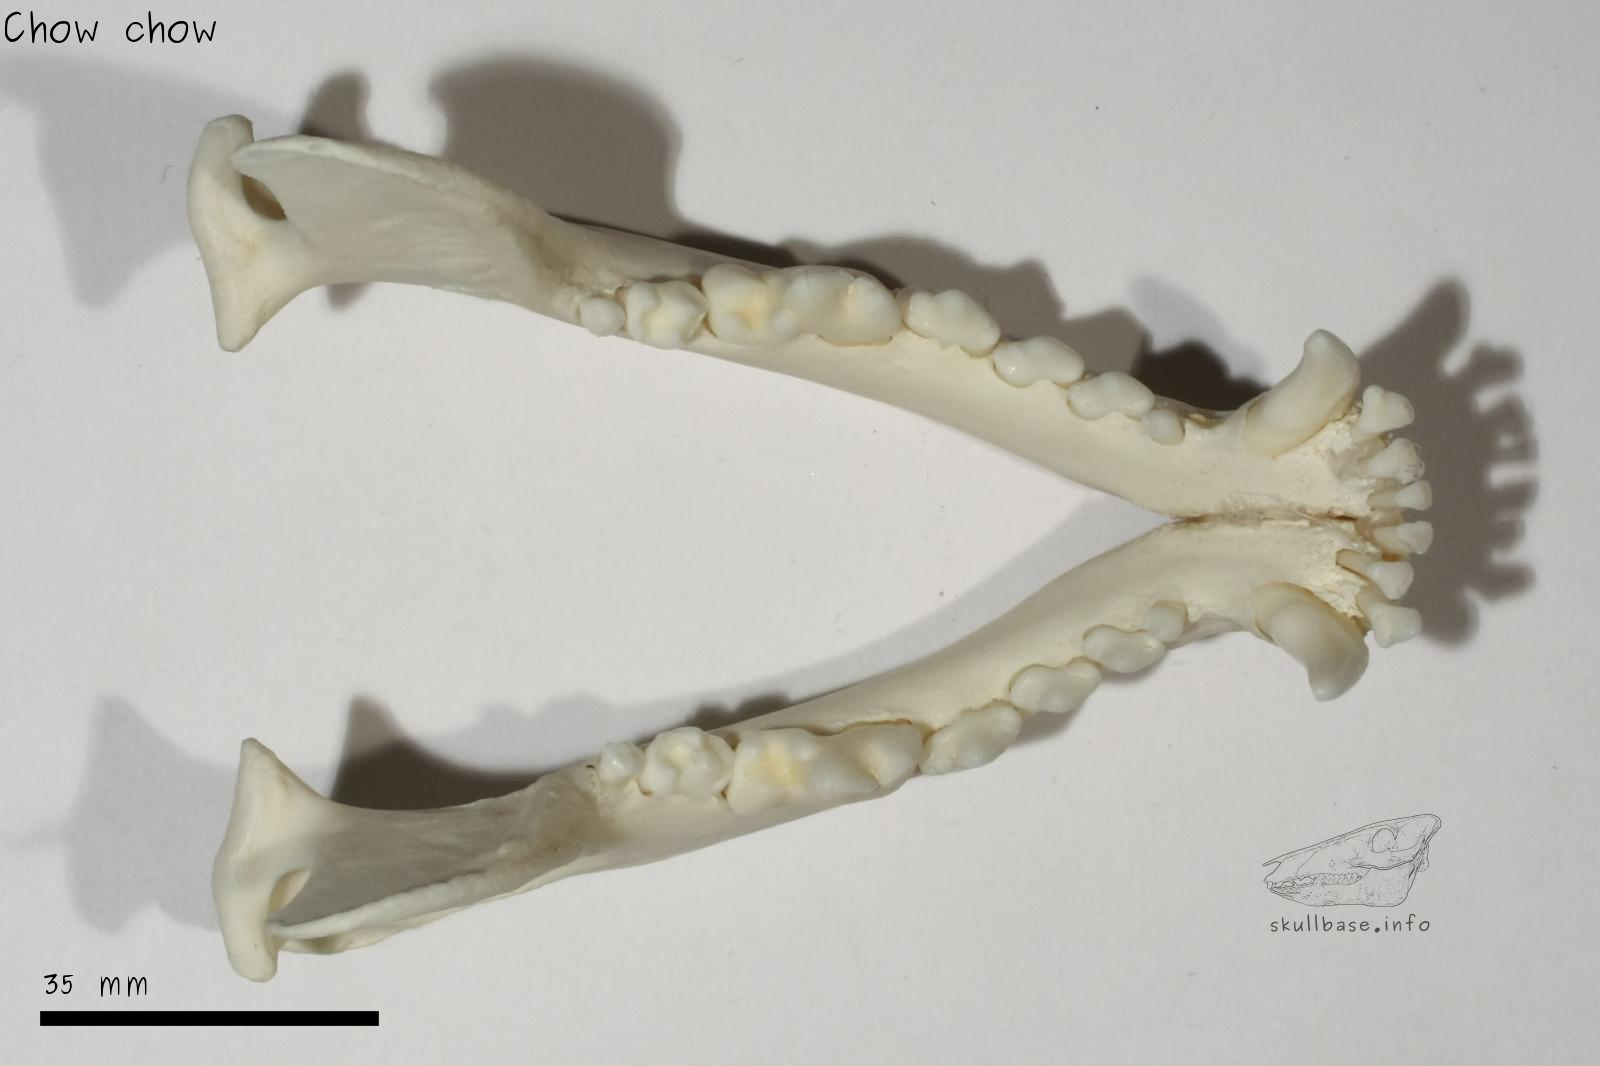 Chow chow (Canis lupus familiaris) jaw